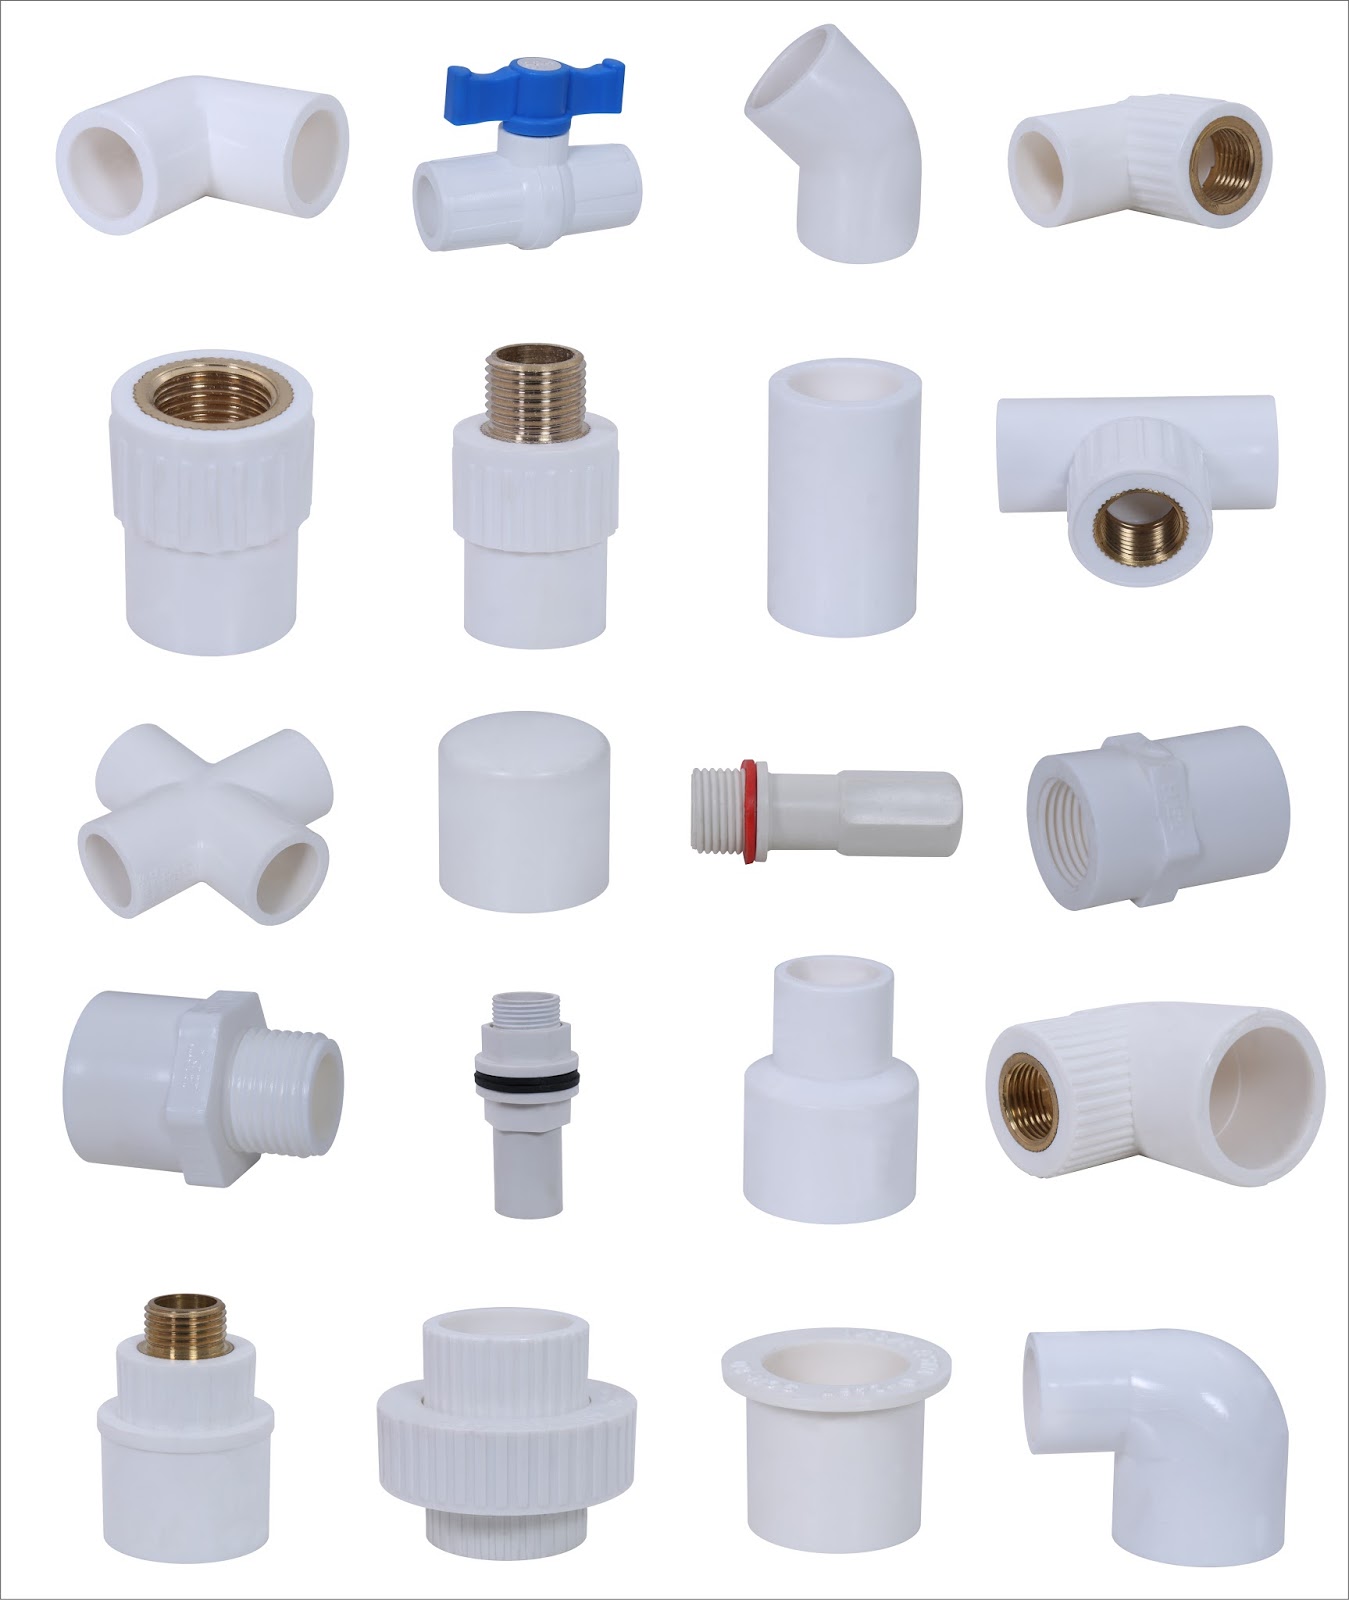 Ashok Plastic UPVC Pipe Fittings Application and Categories